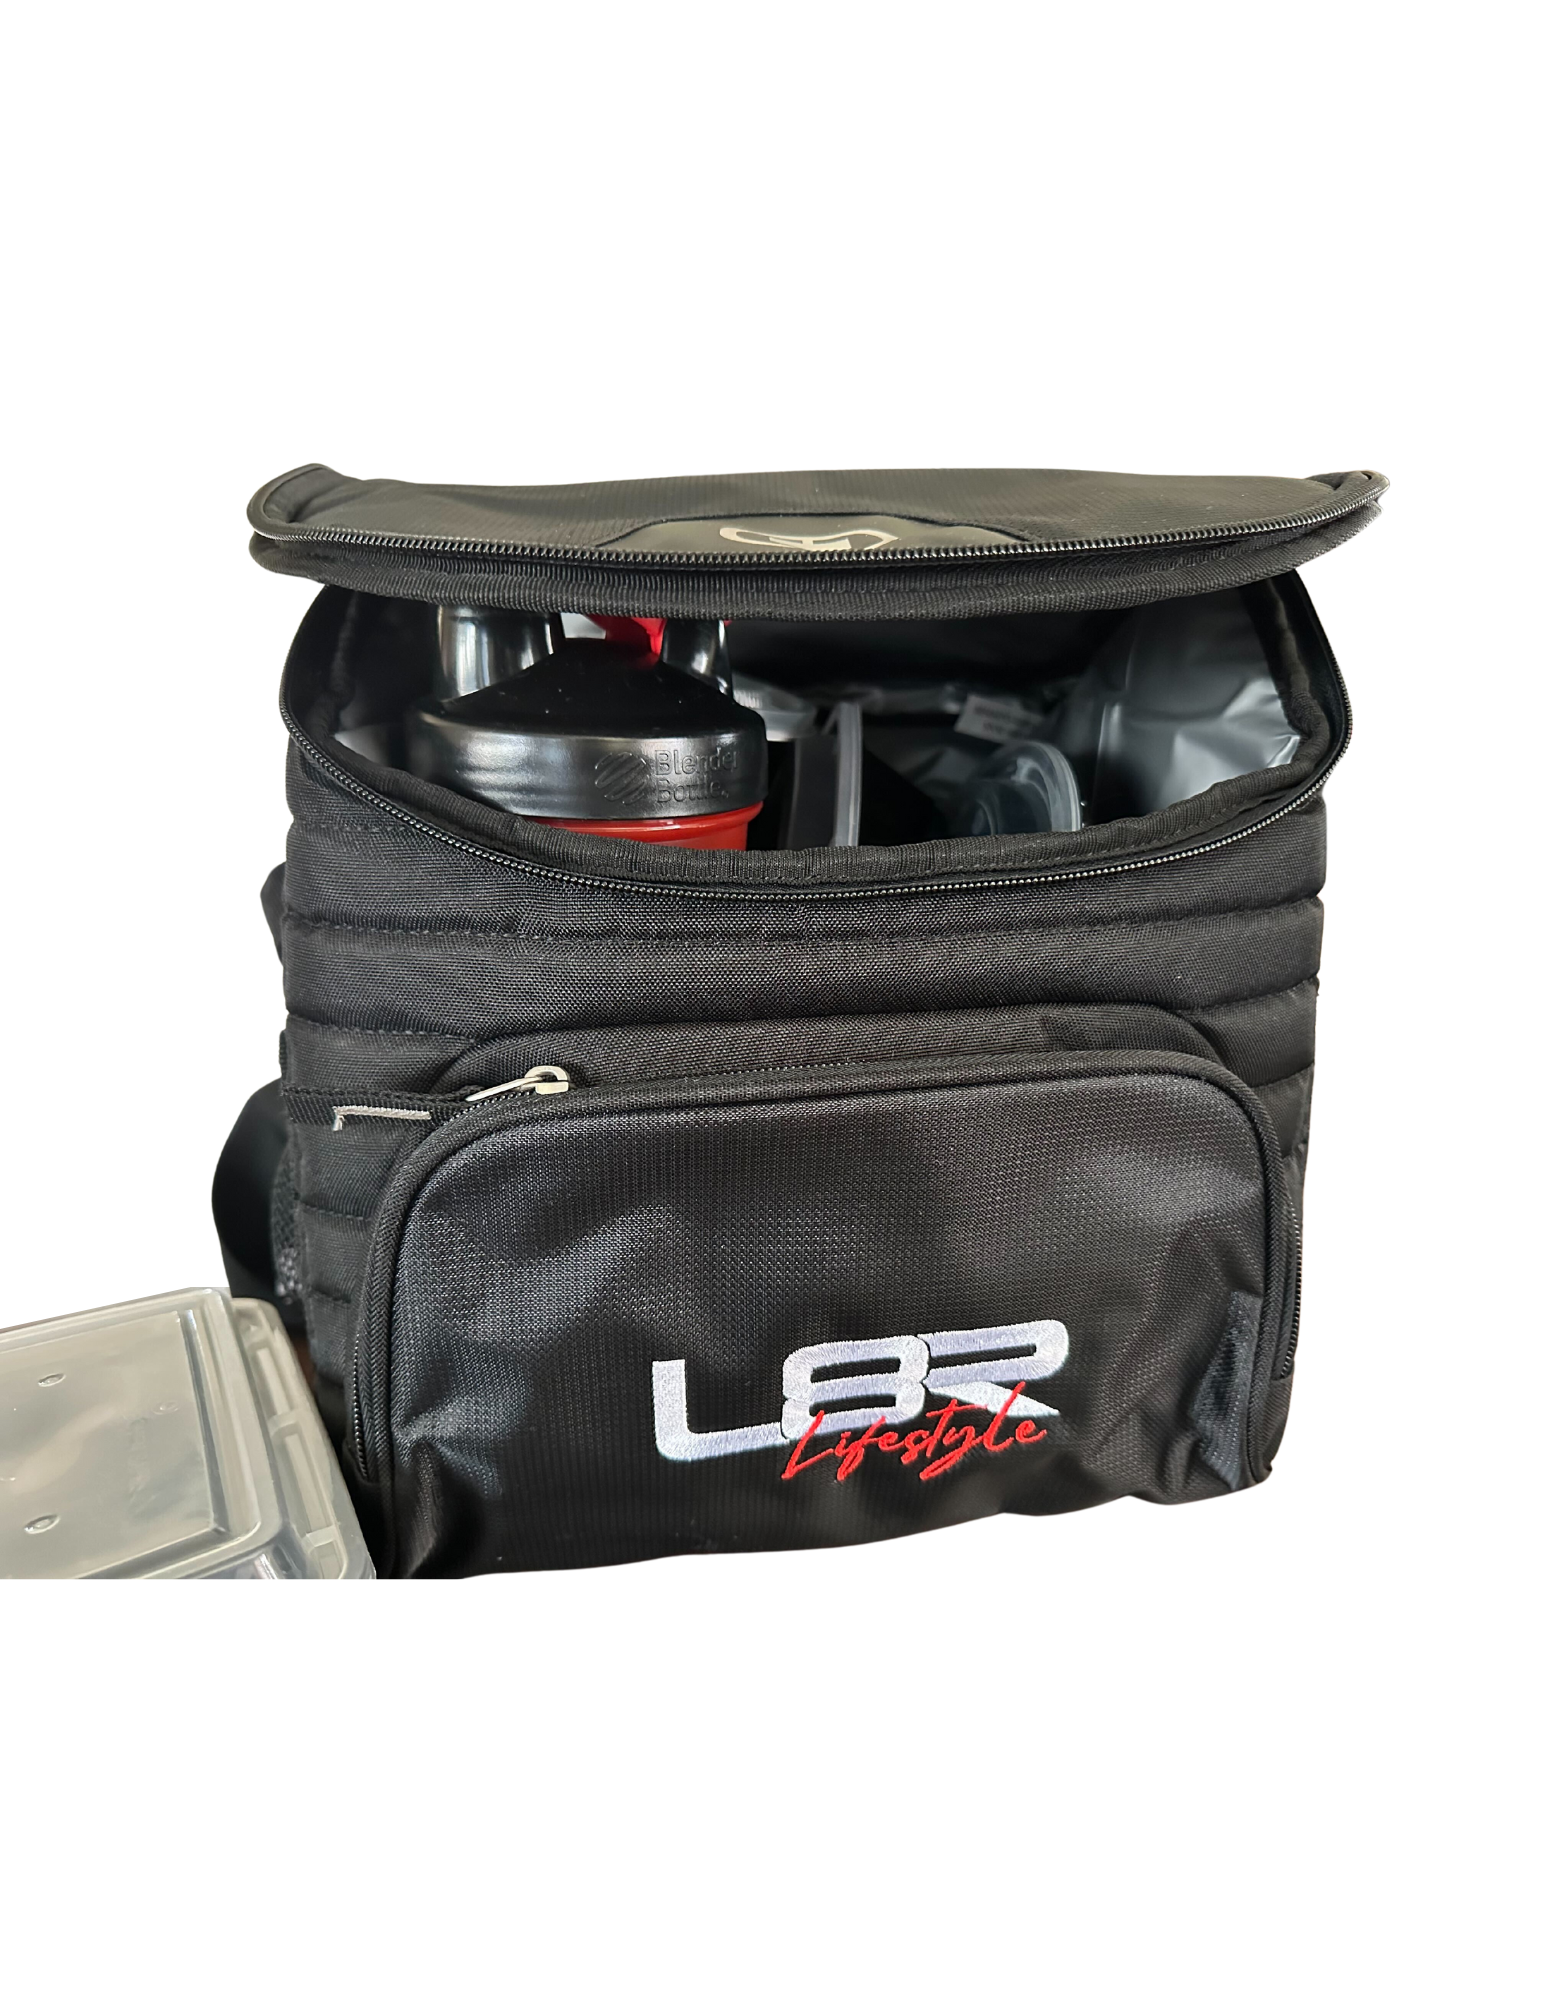 *NEW LOGO Large L8R x OGIO Insulated Cooler Bag